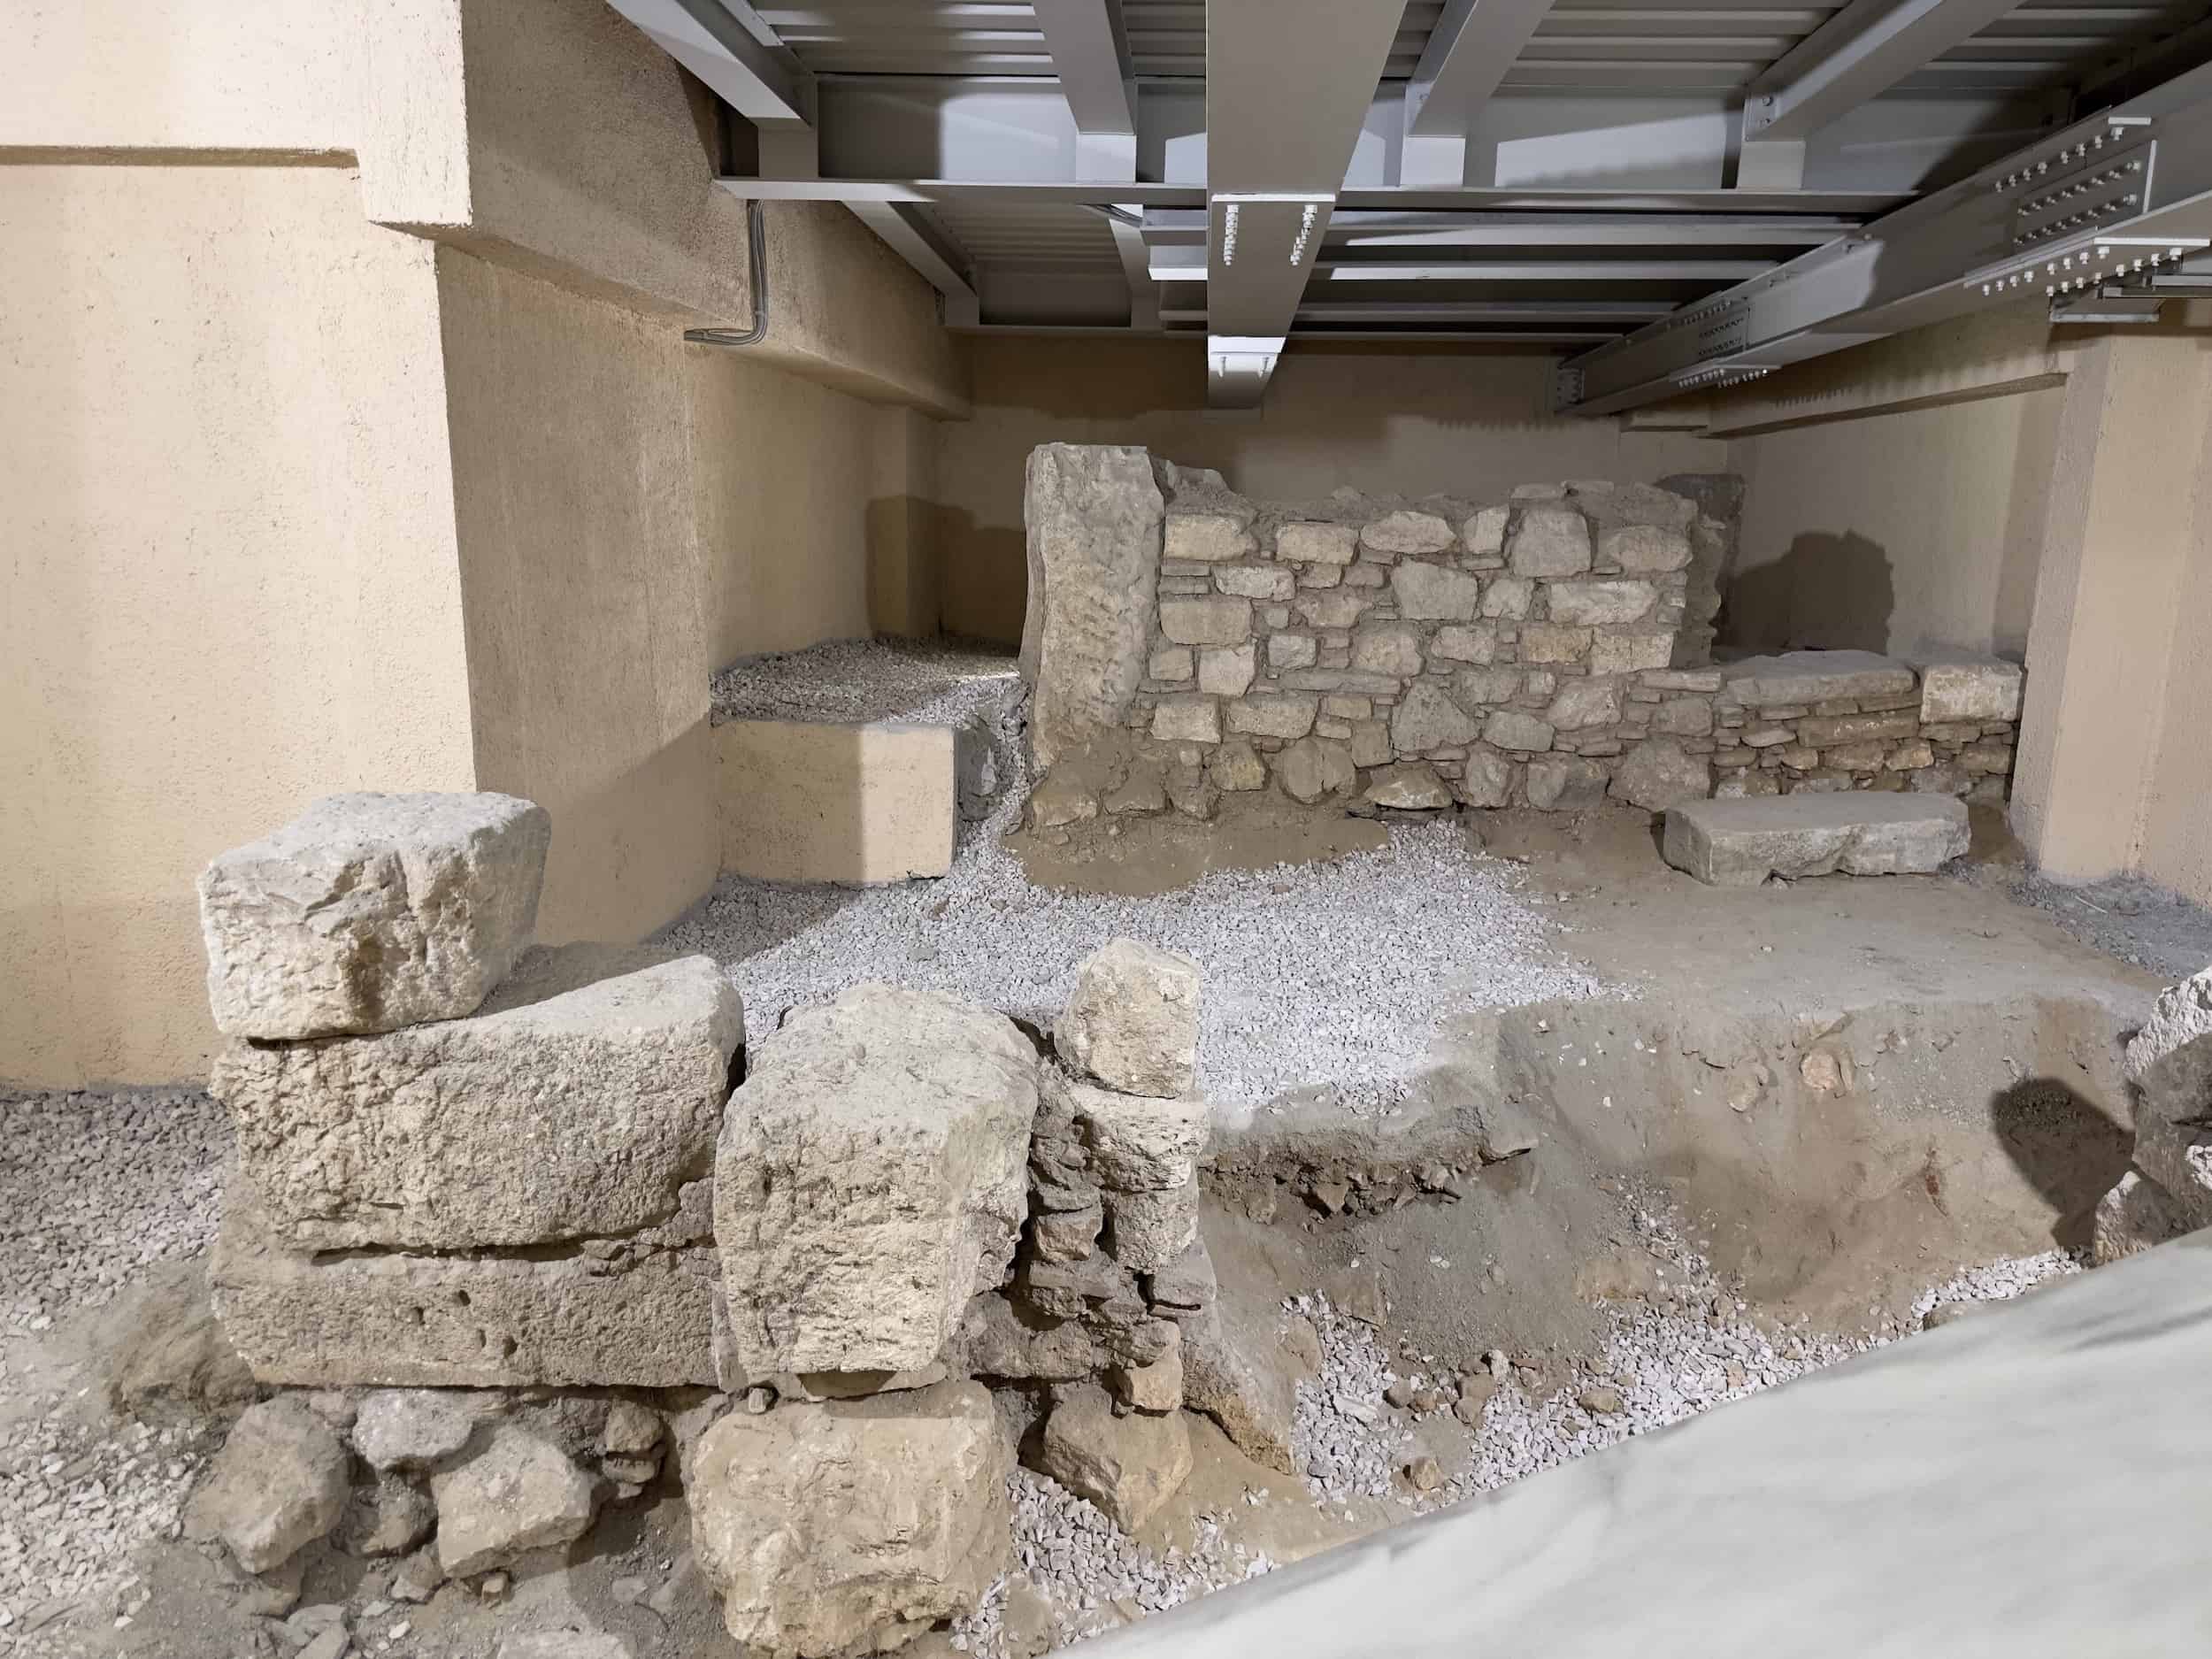 Excavation area at the Canellopoulos Museum in Athens, Greece